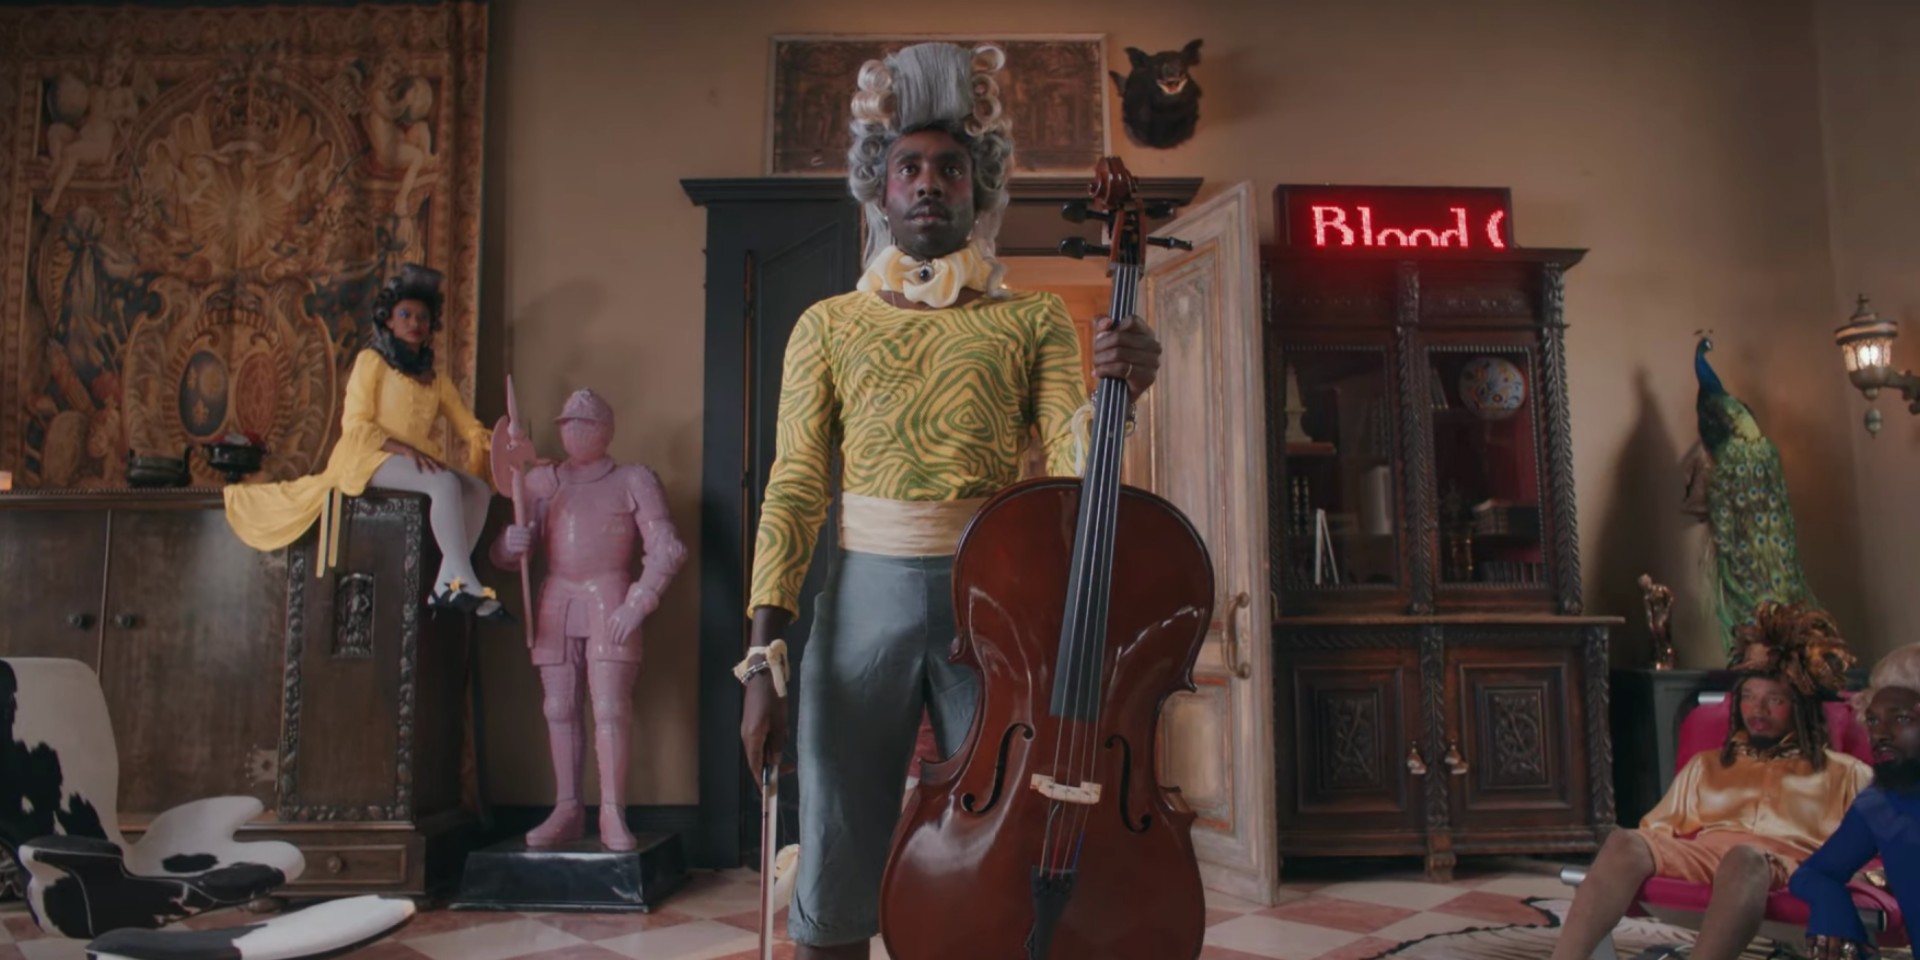 Blood Orange releases new 'Benzo' video, set in a royal court – watch